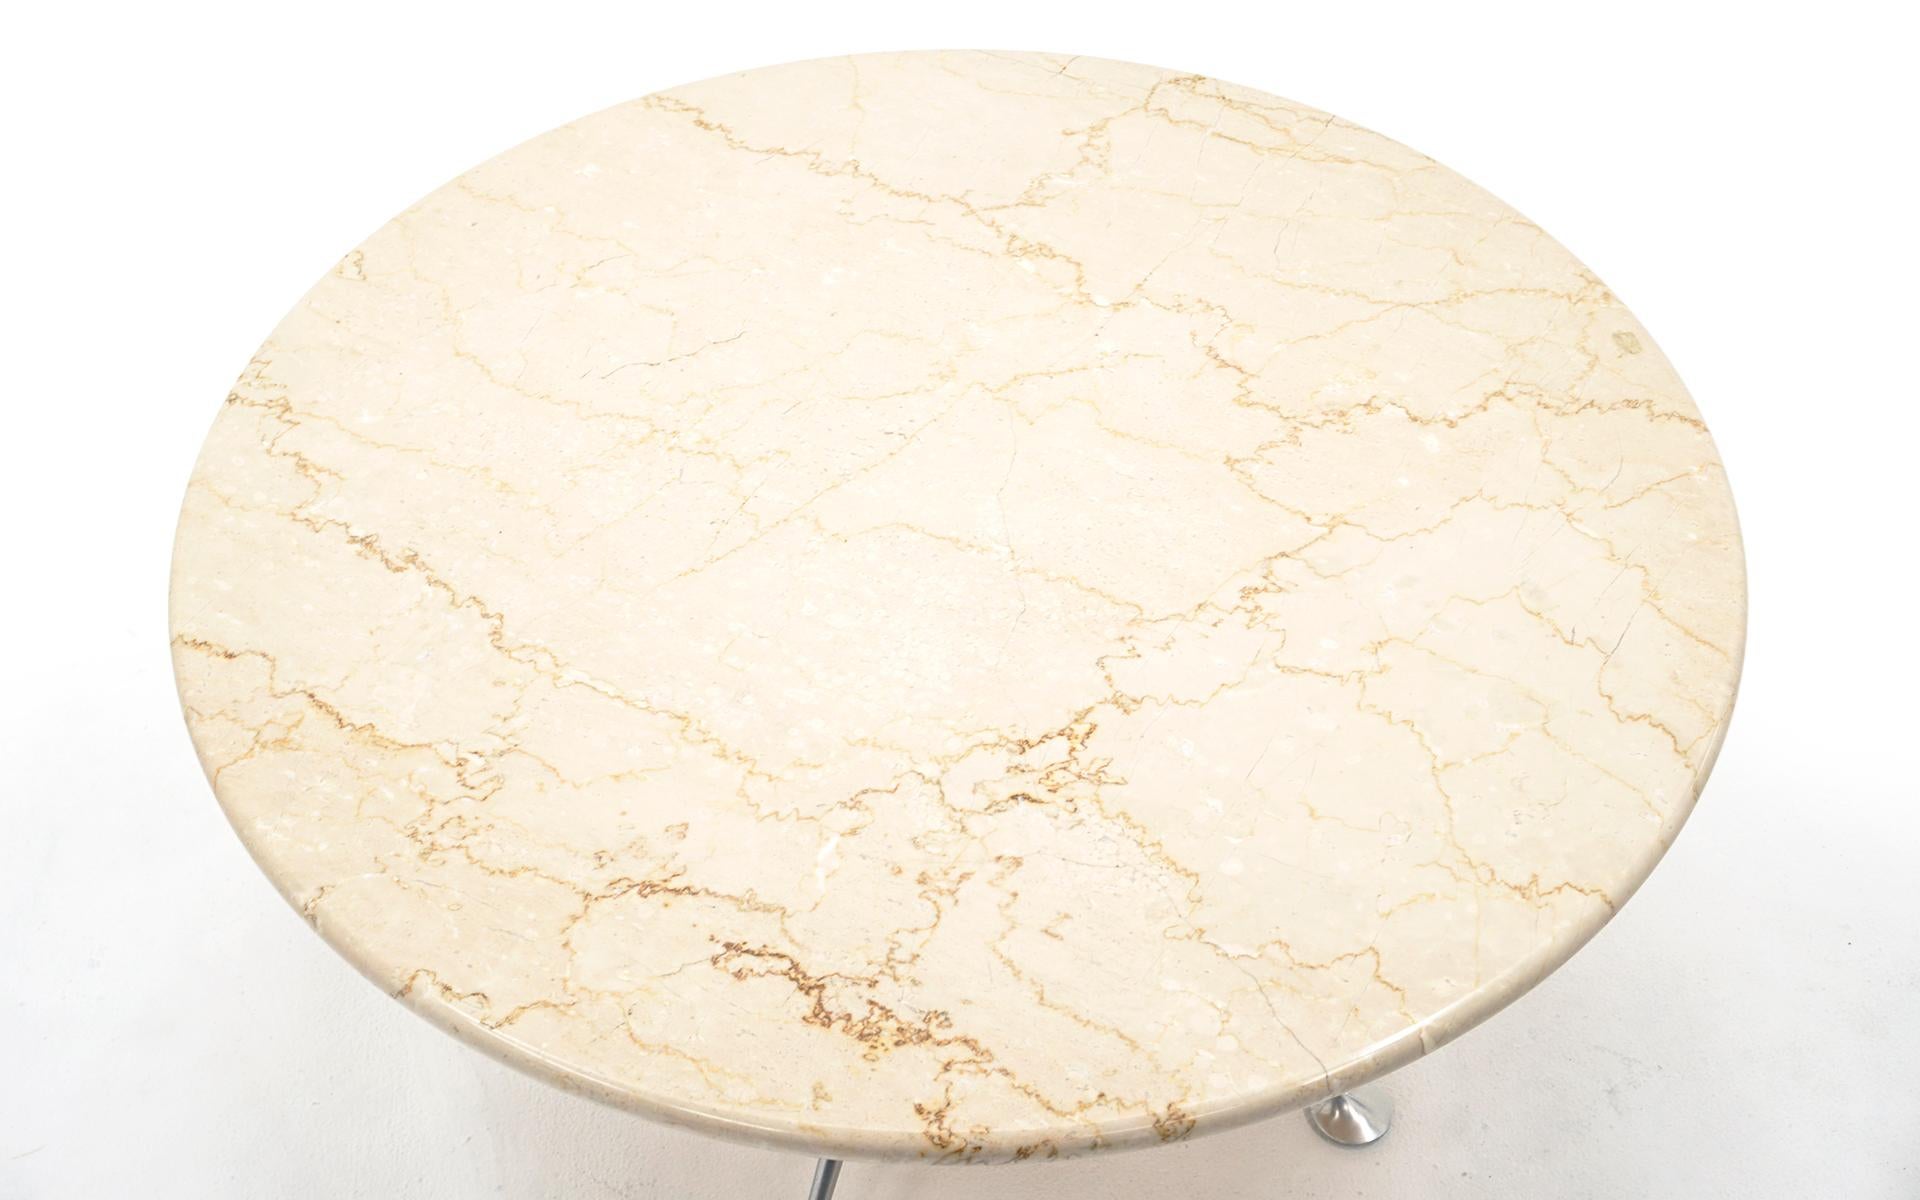 Mid-Century Modern Early Alexander Girard Round Coffee / Side Table, Beige Marble, Aluminum Base